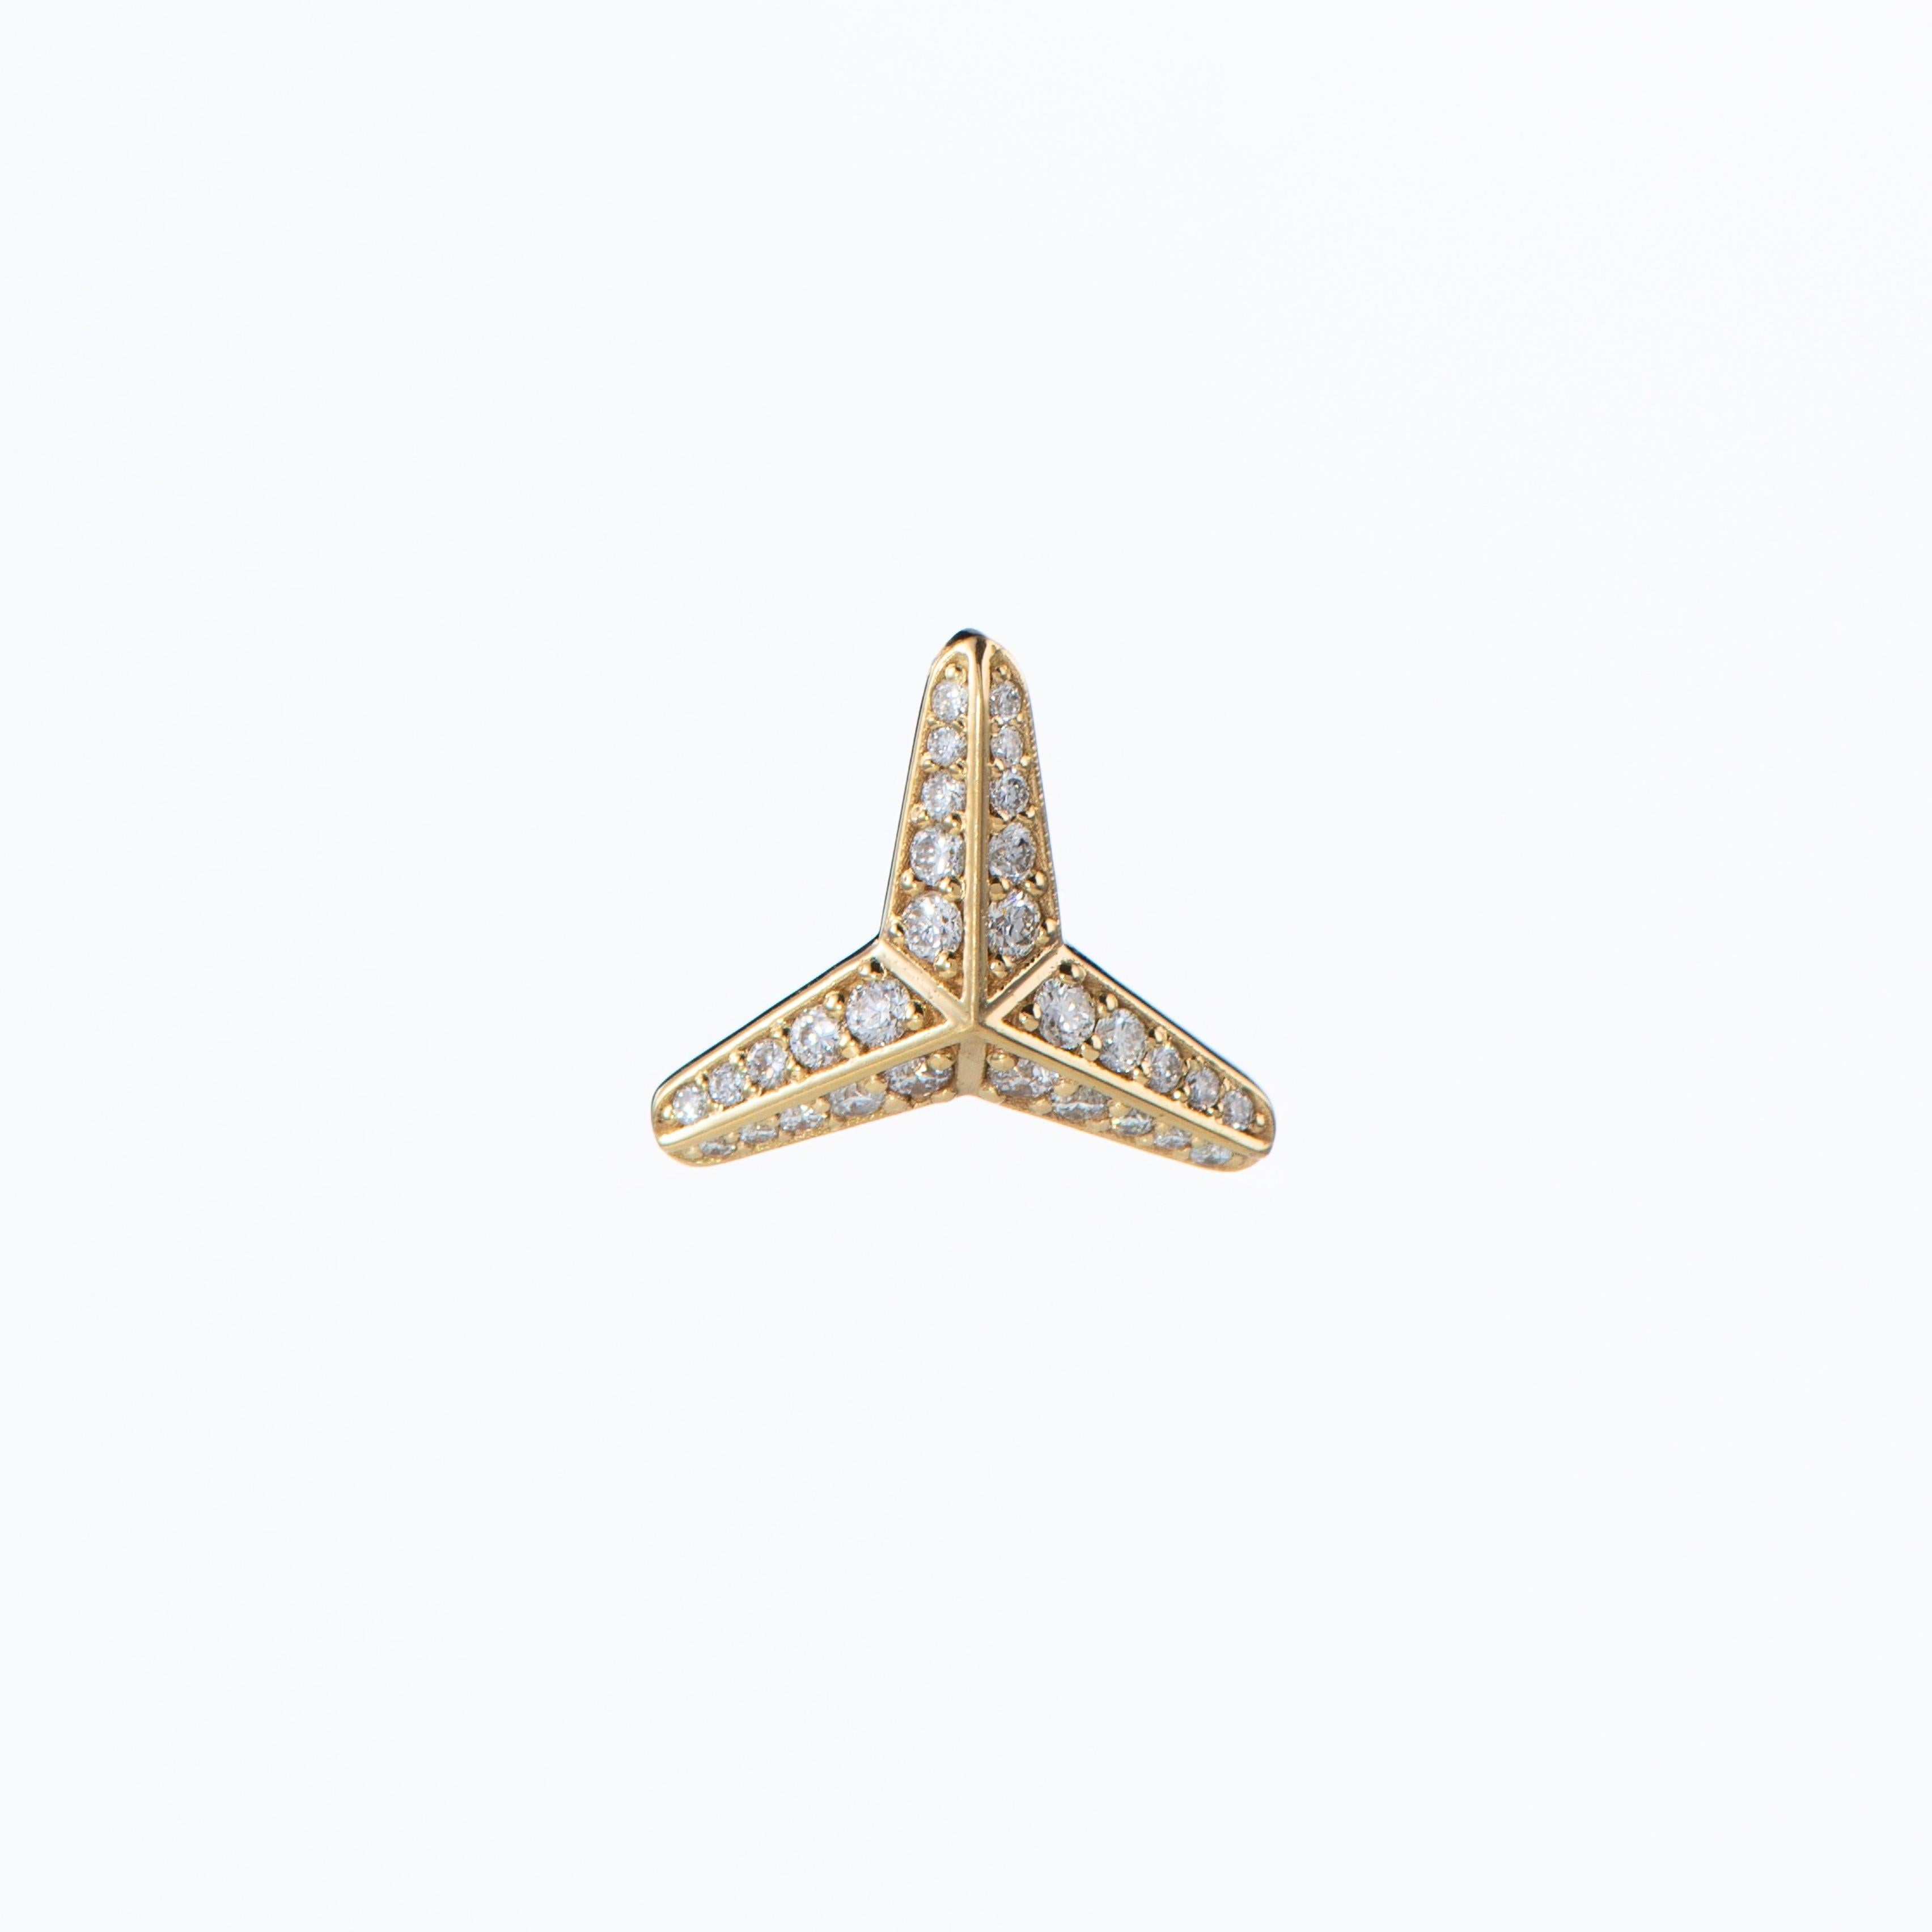 The Three pointed star, diamond pendant necklace is crafted in 18K yellow gold hallmarked in Cyprus. This stunning, diamond pendant necklace comes in a highly polished finish with a pierced back and features natural white Diamonds totalling 0,31